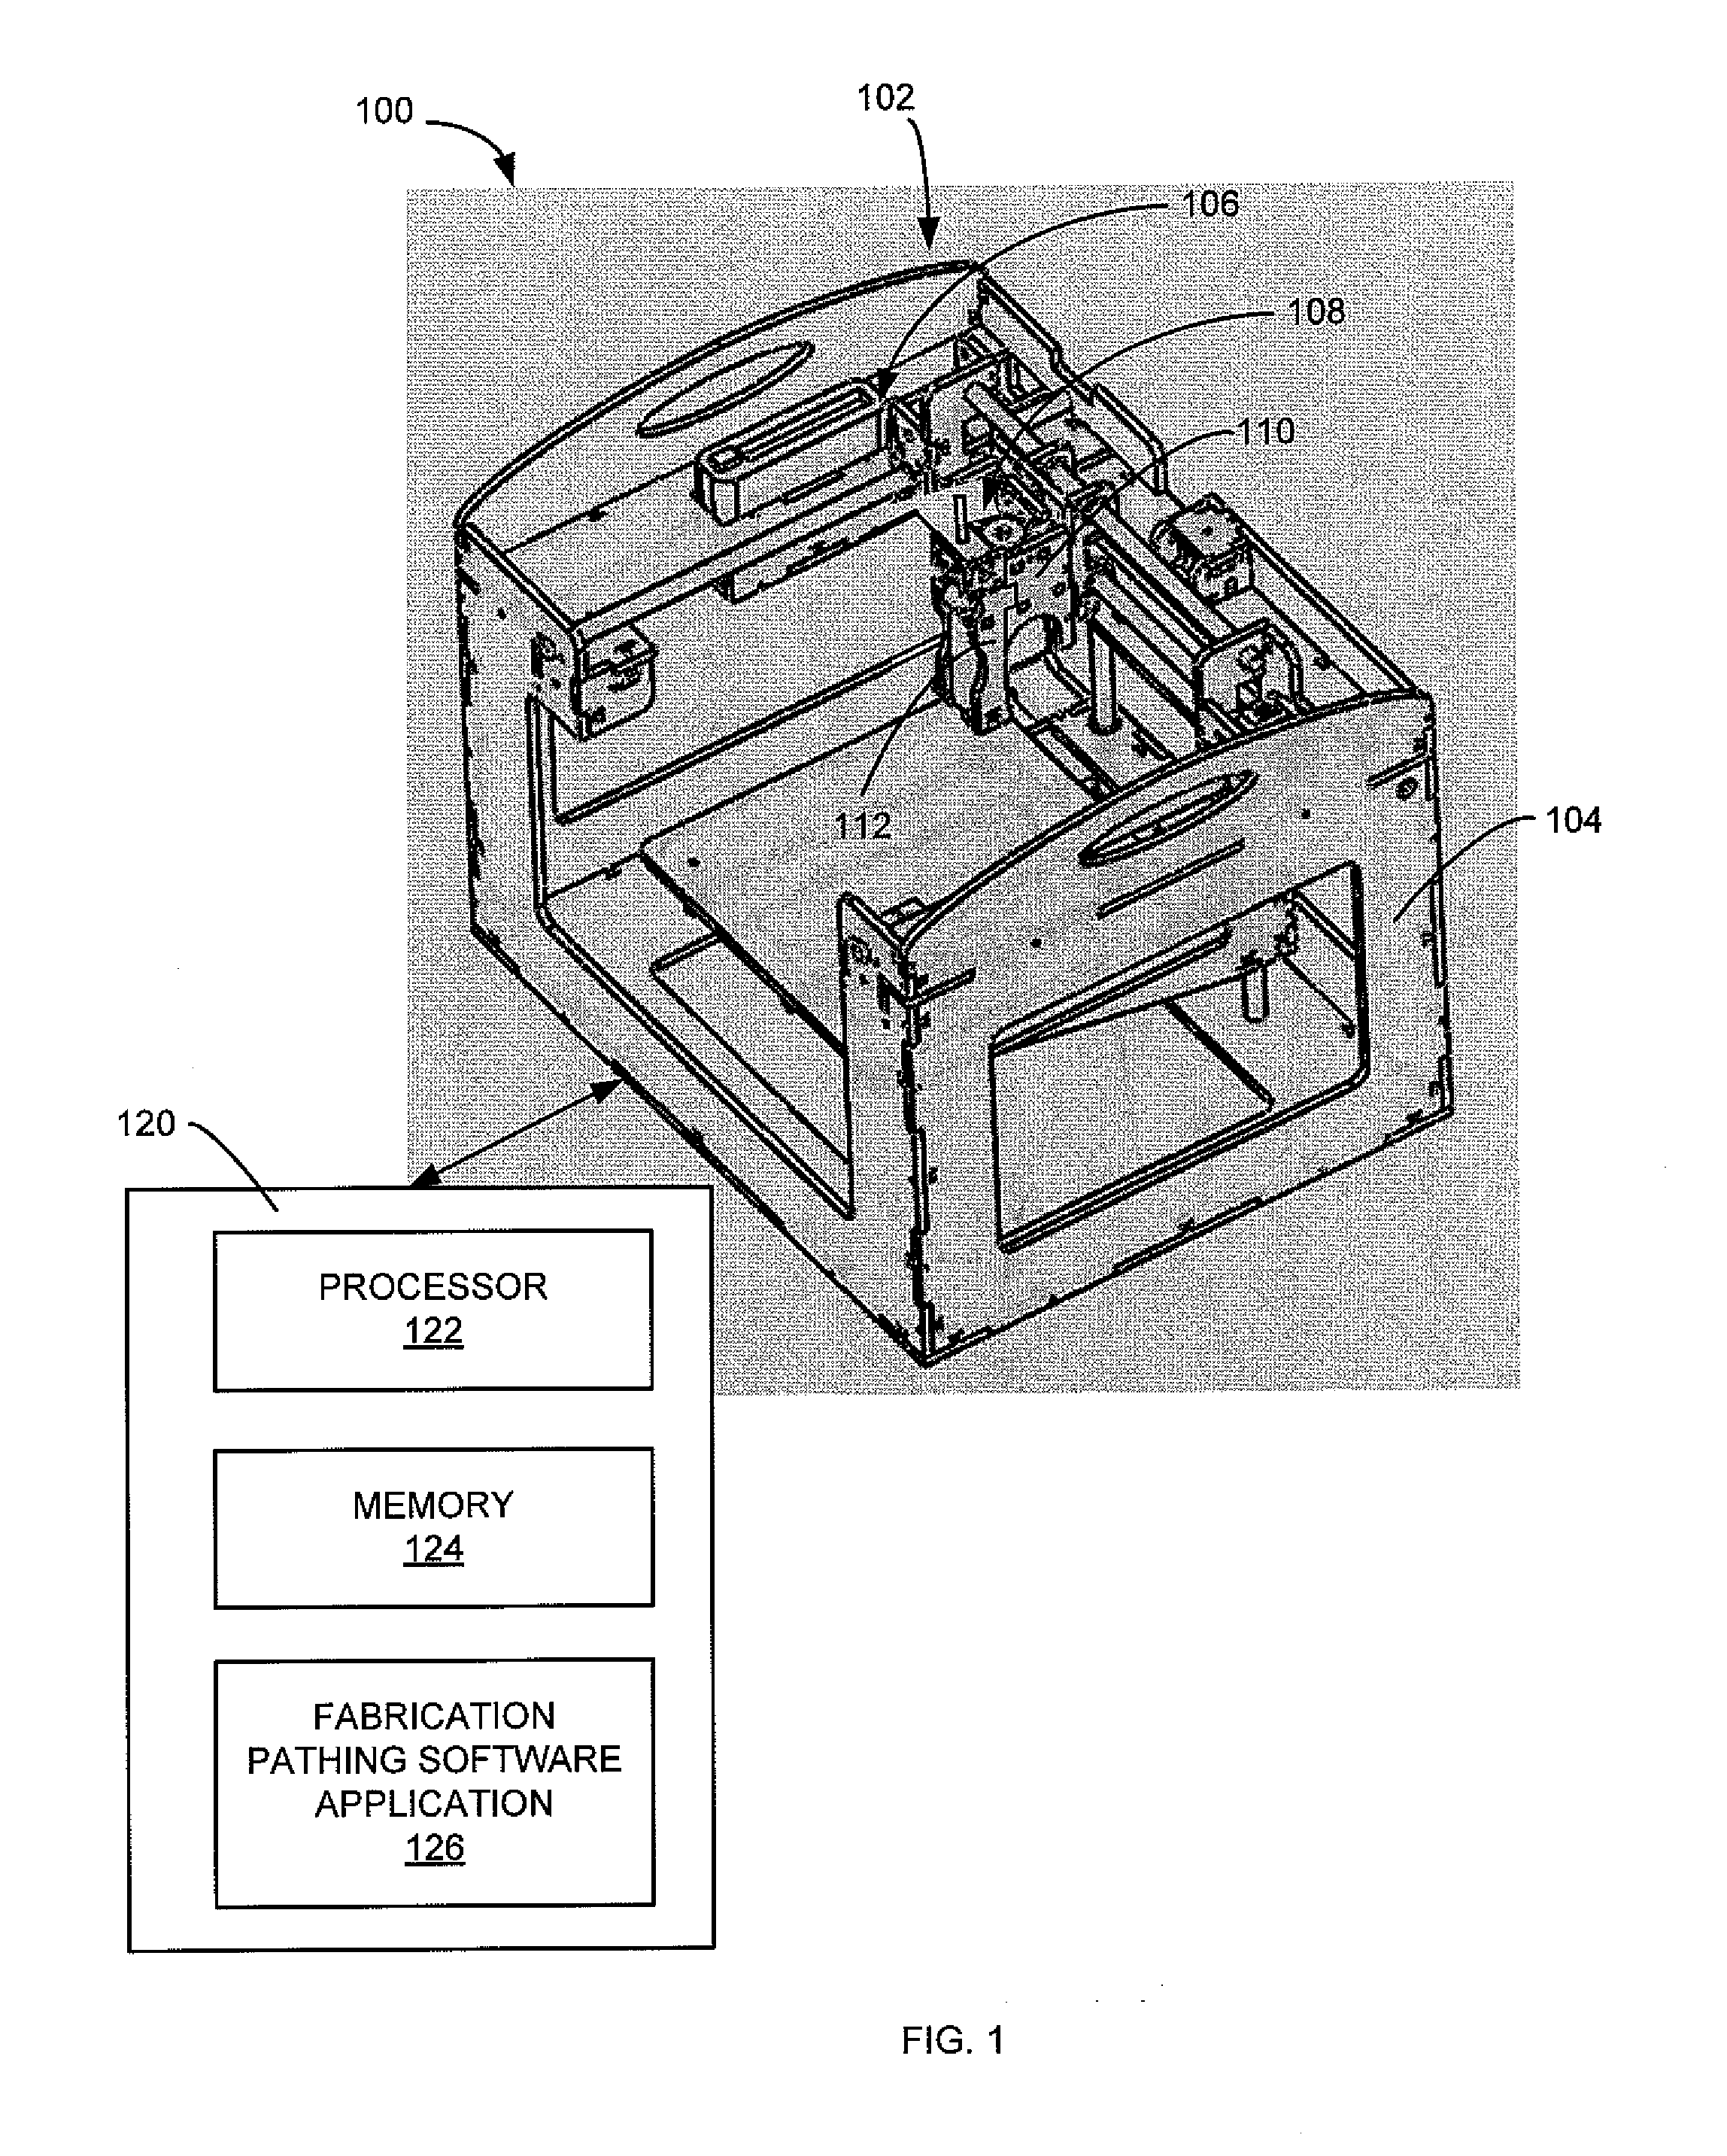 Deposition tool with interchangeable material bay